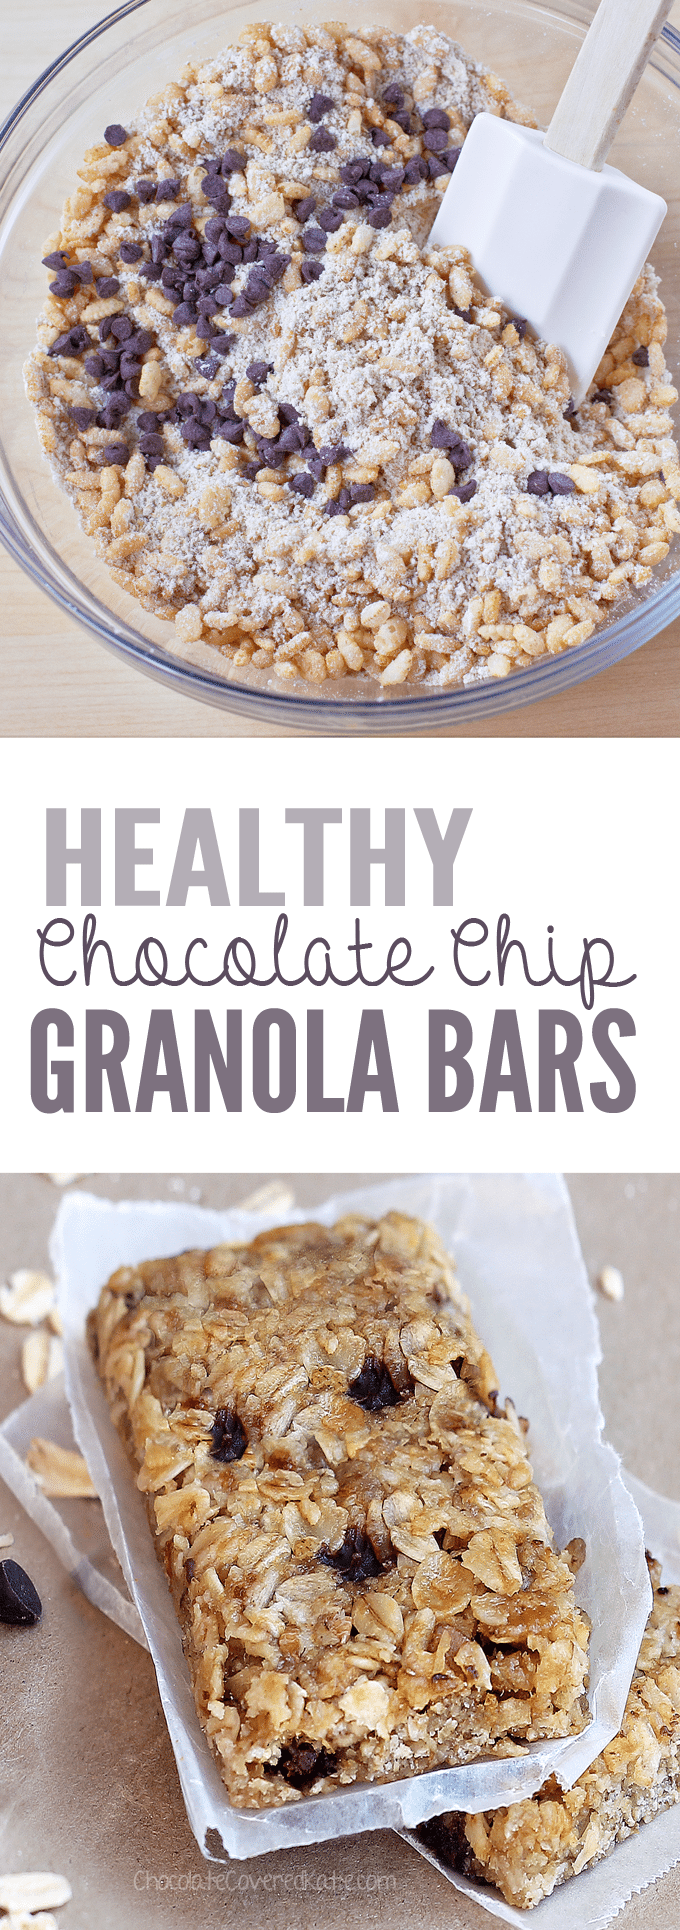 Easy-to-make, healthy granola bars - packed with rolled oats, crispy cereal, & mini chocolate chips! @choccoveredkt